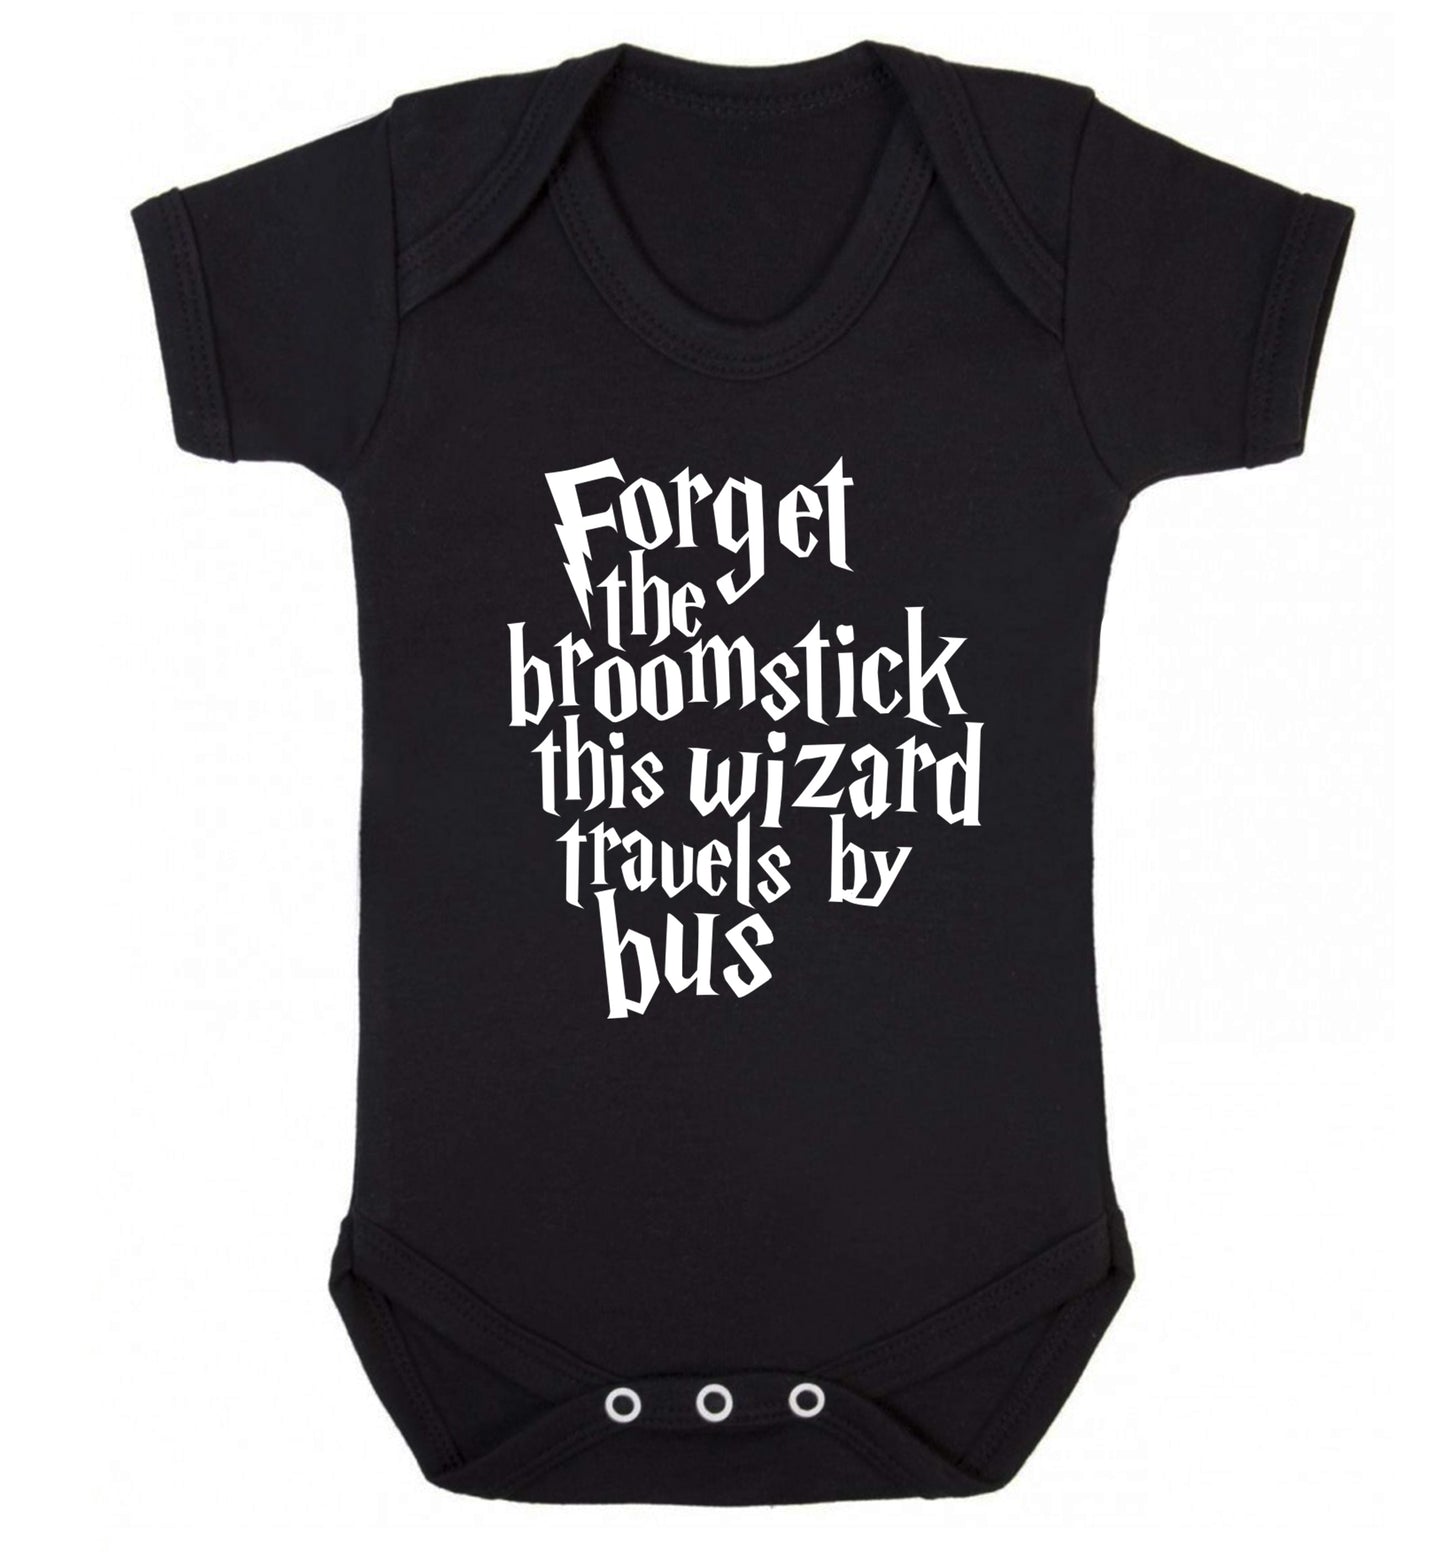 Forget the broomstick this wizard travels by bus Baby Vest black 18-24 months